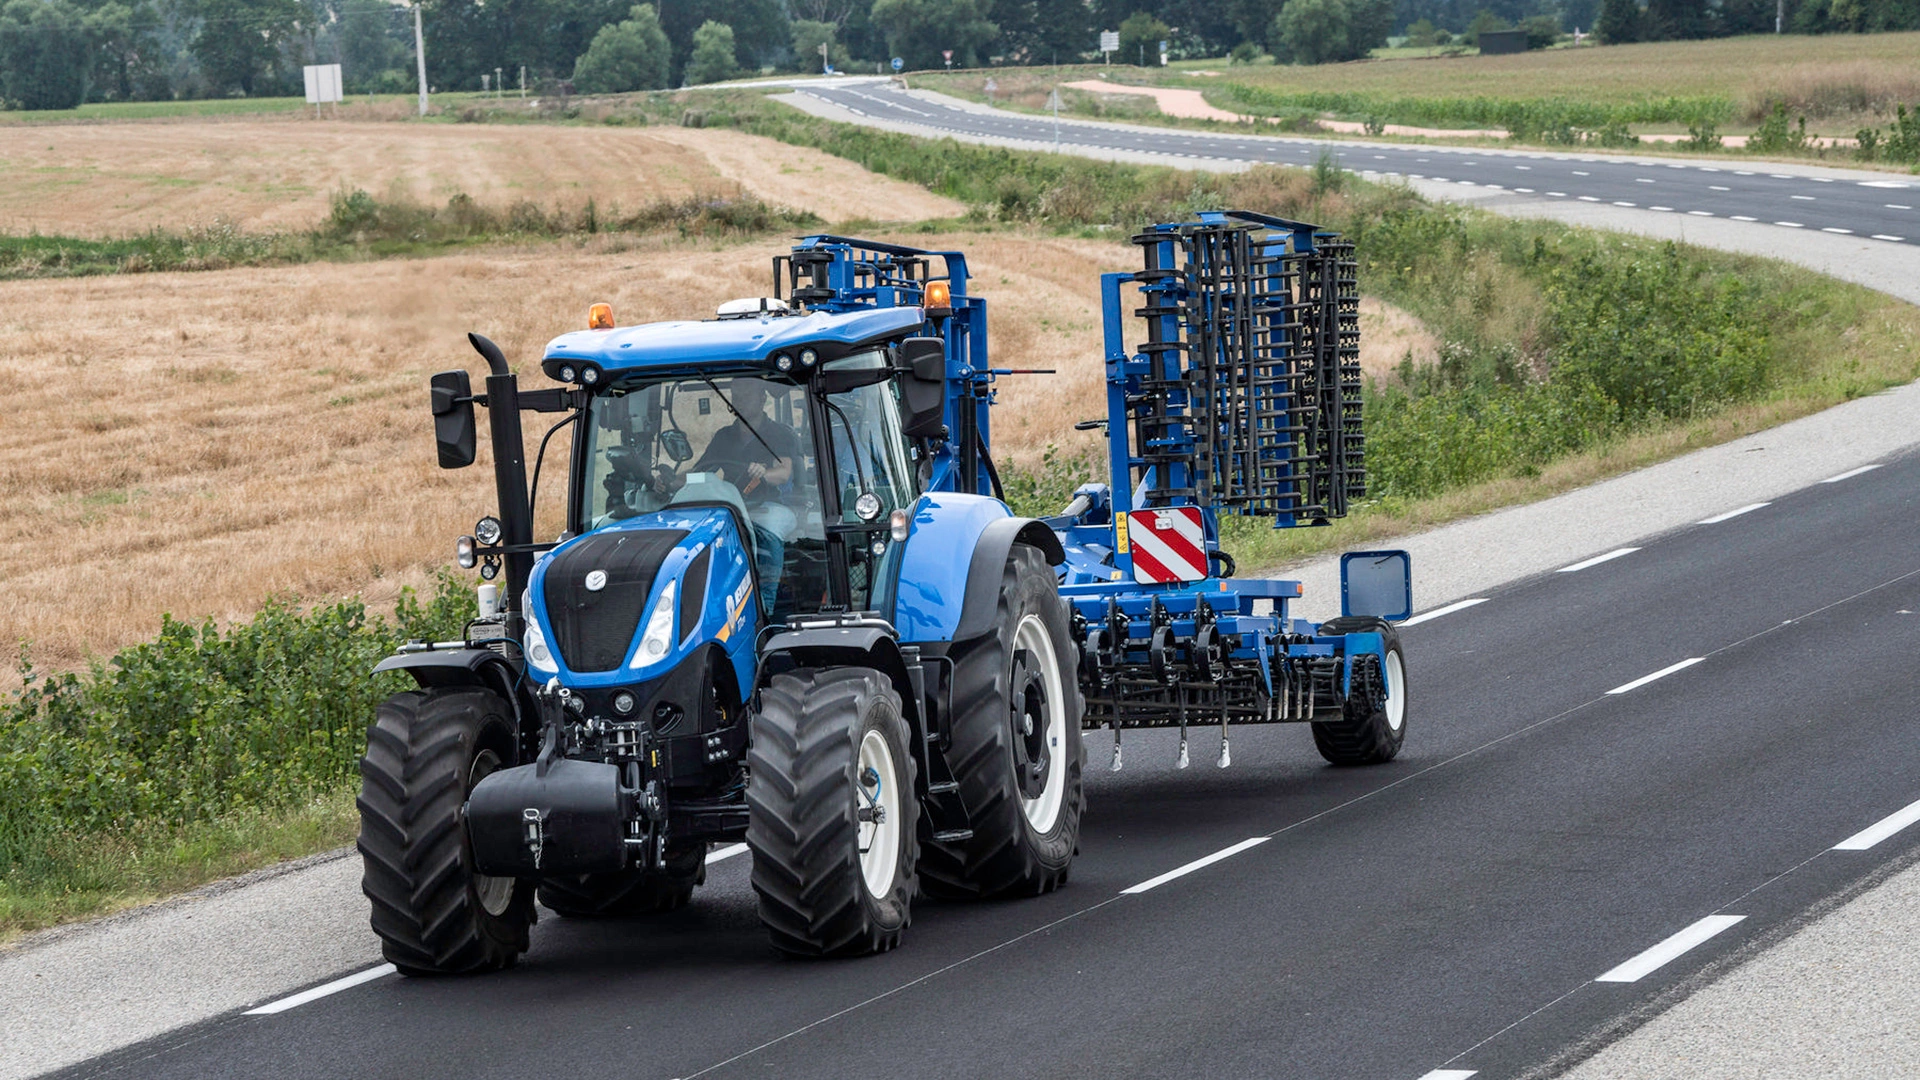 T7 LWB Farming Tractor transporting tilling equipment on the road